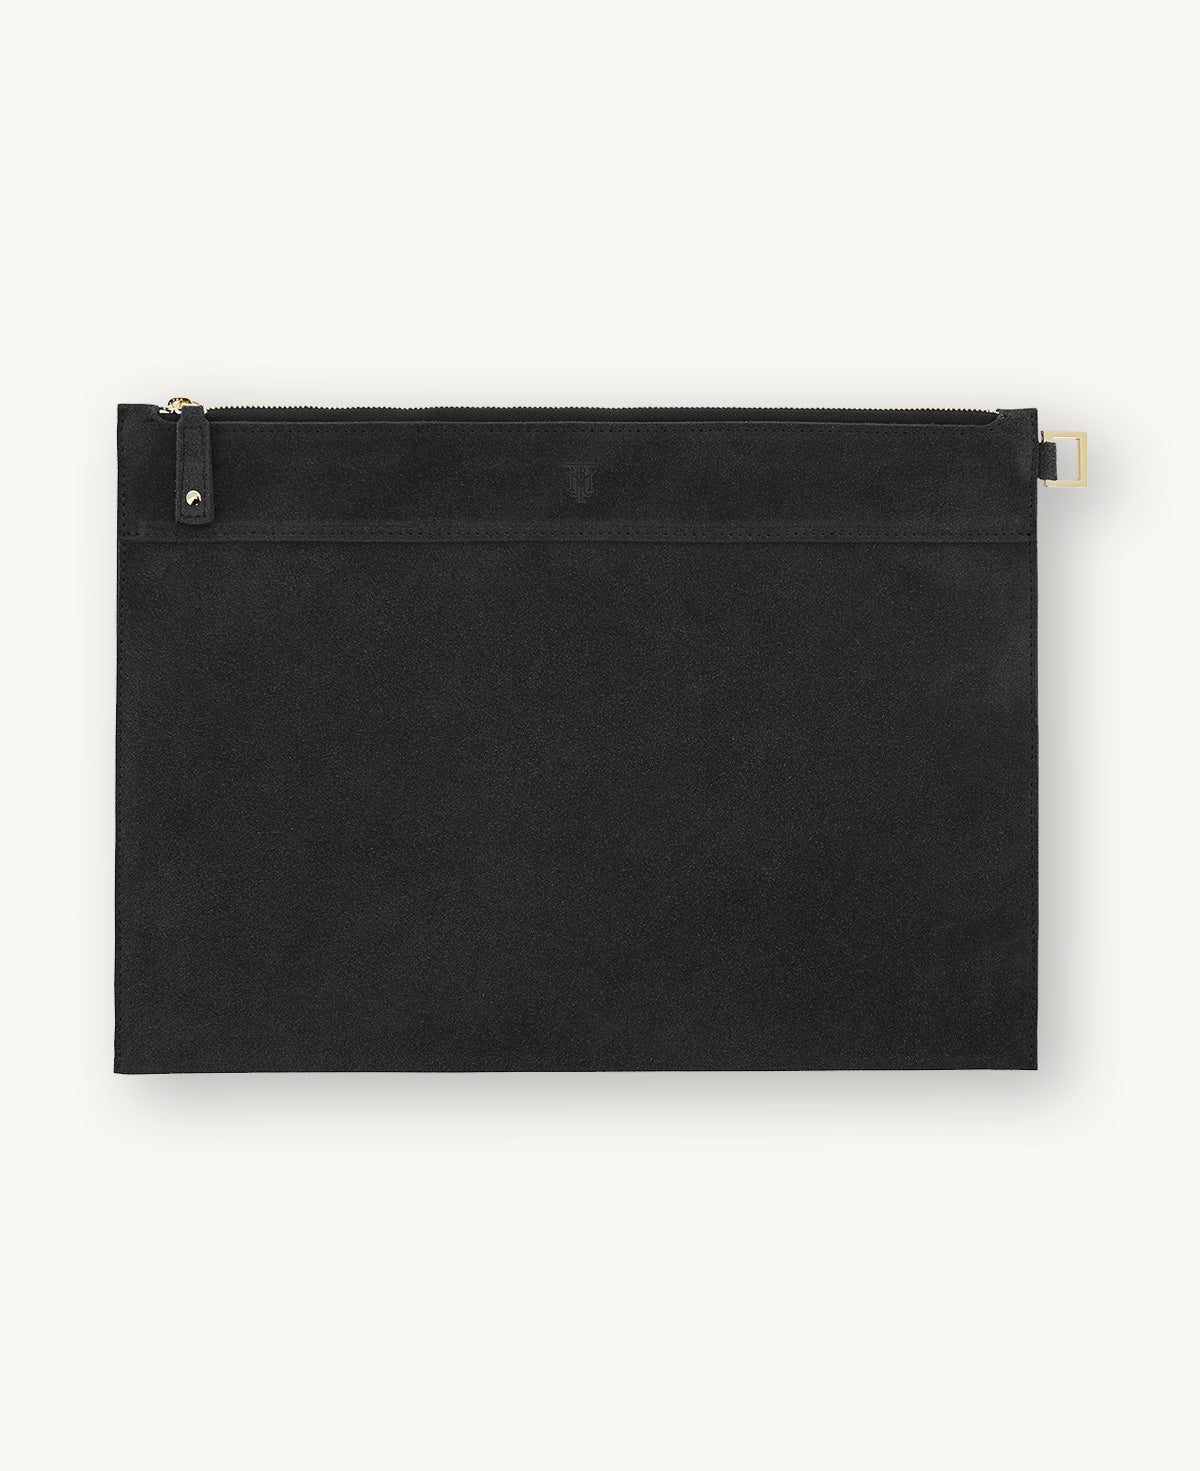 Large Envelope Clutch Bag with Chain Strap Black : Amazon.in: Fashion